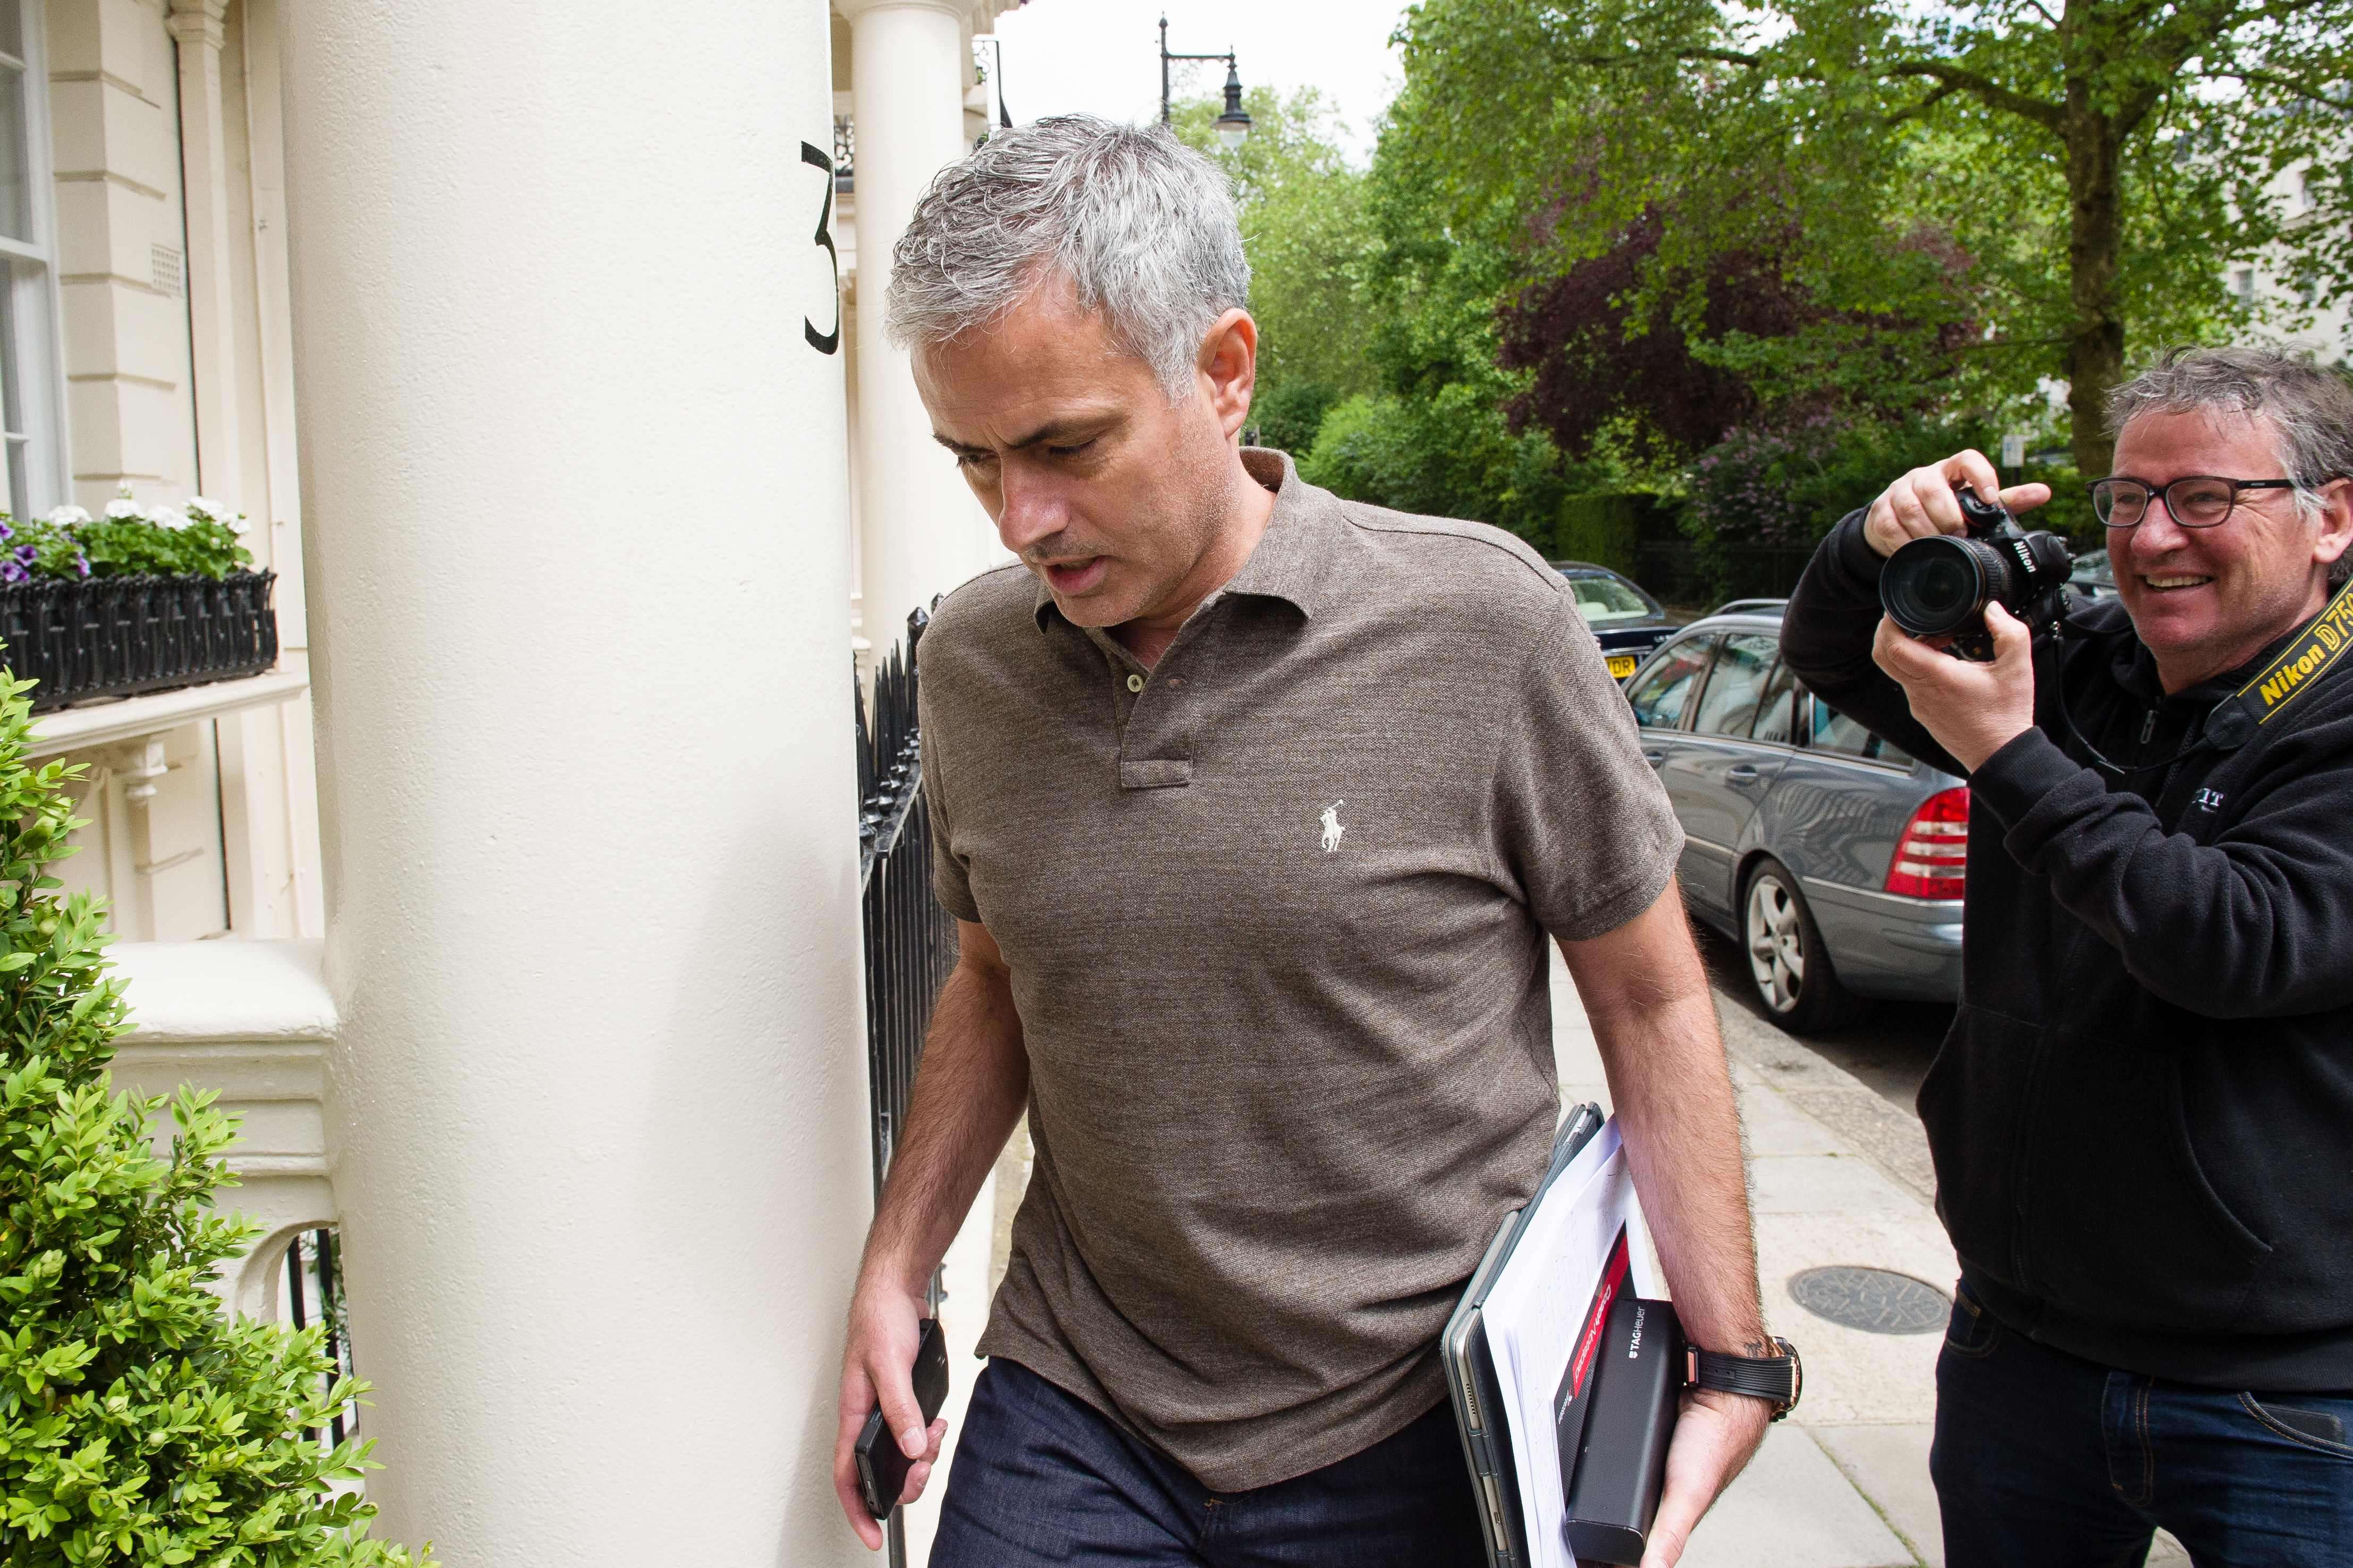 Portuguese football manager Jose Mourinho is pictured as he returns to his home in London. Photo: AFP